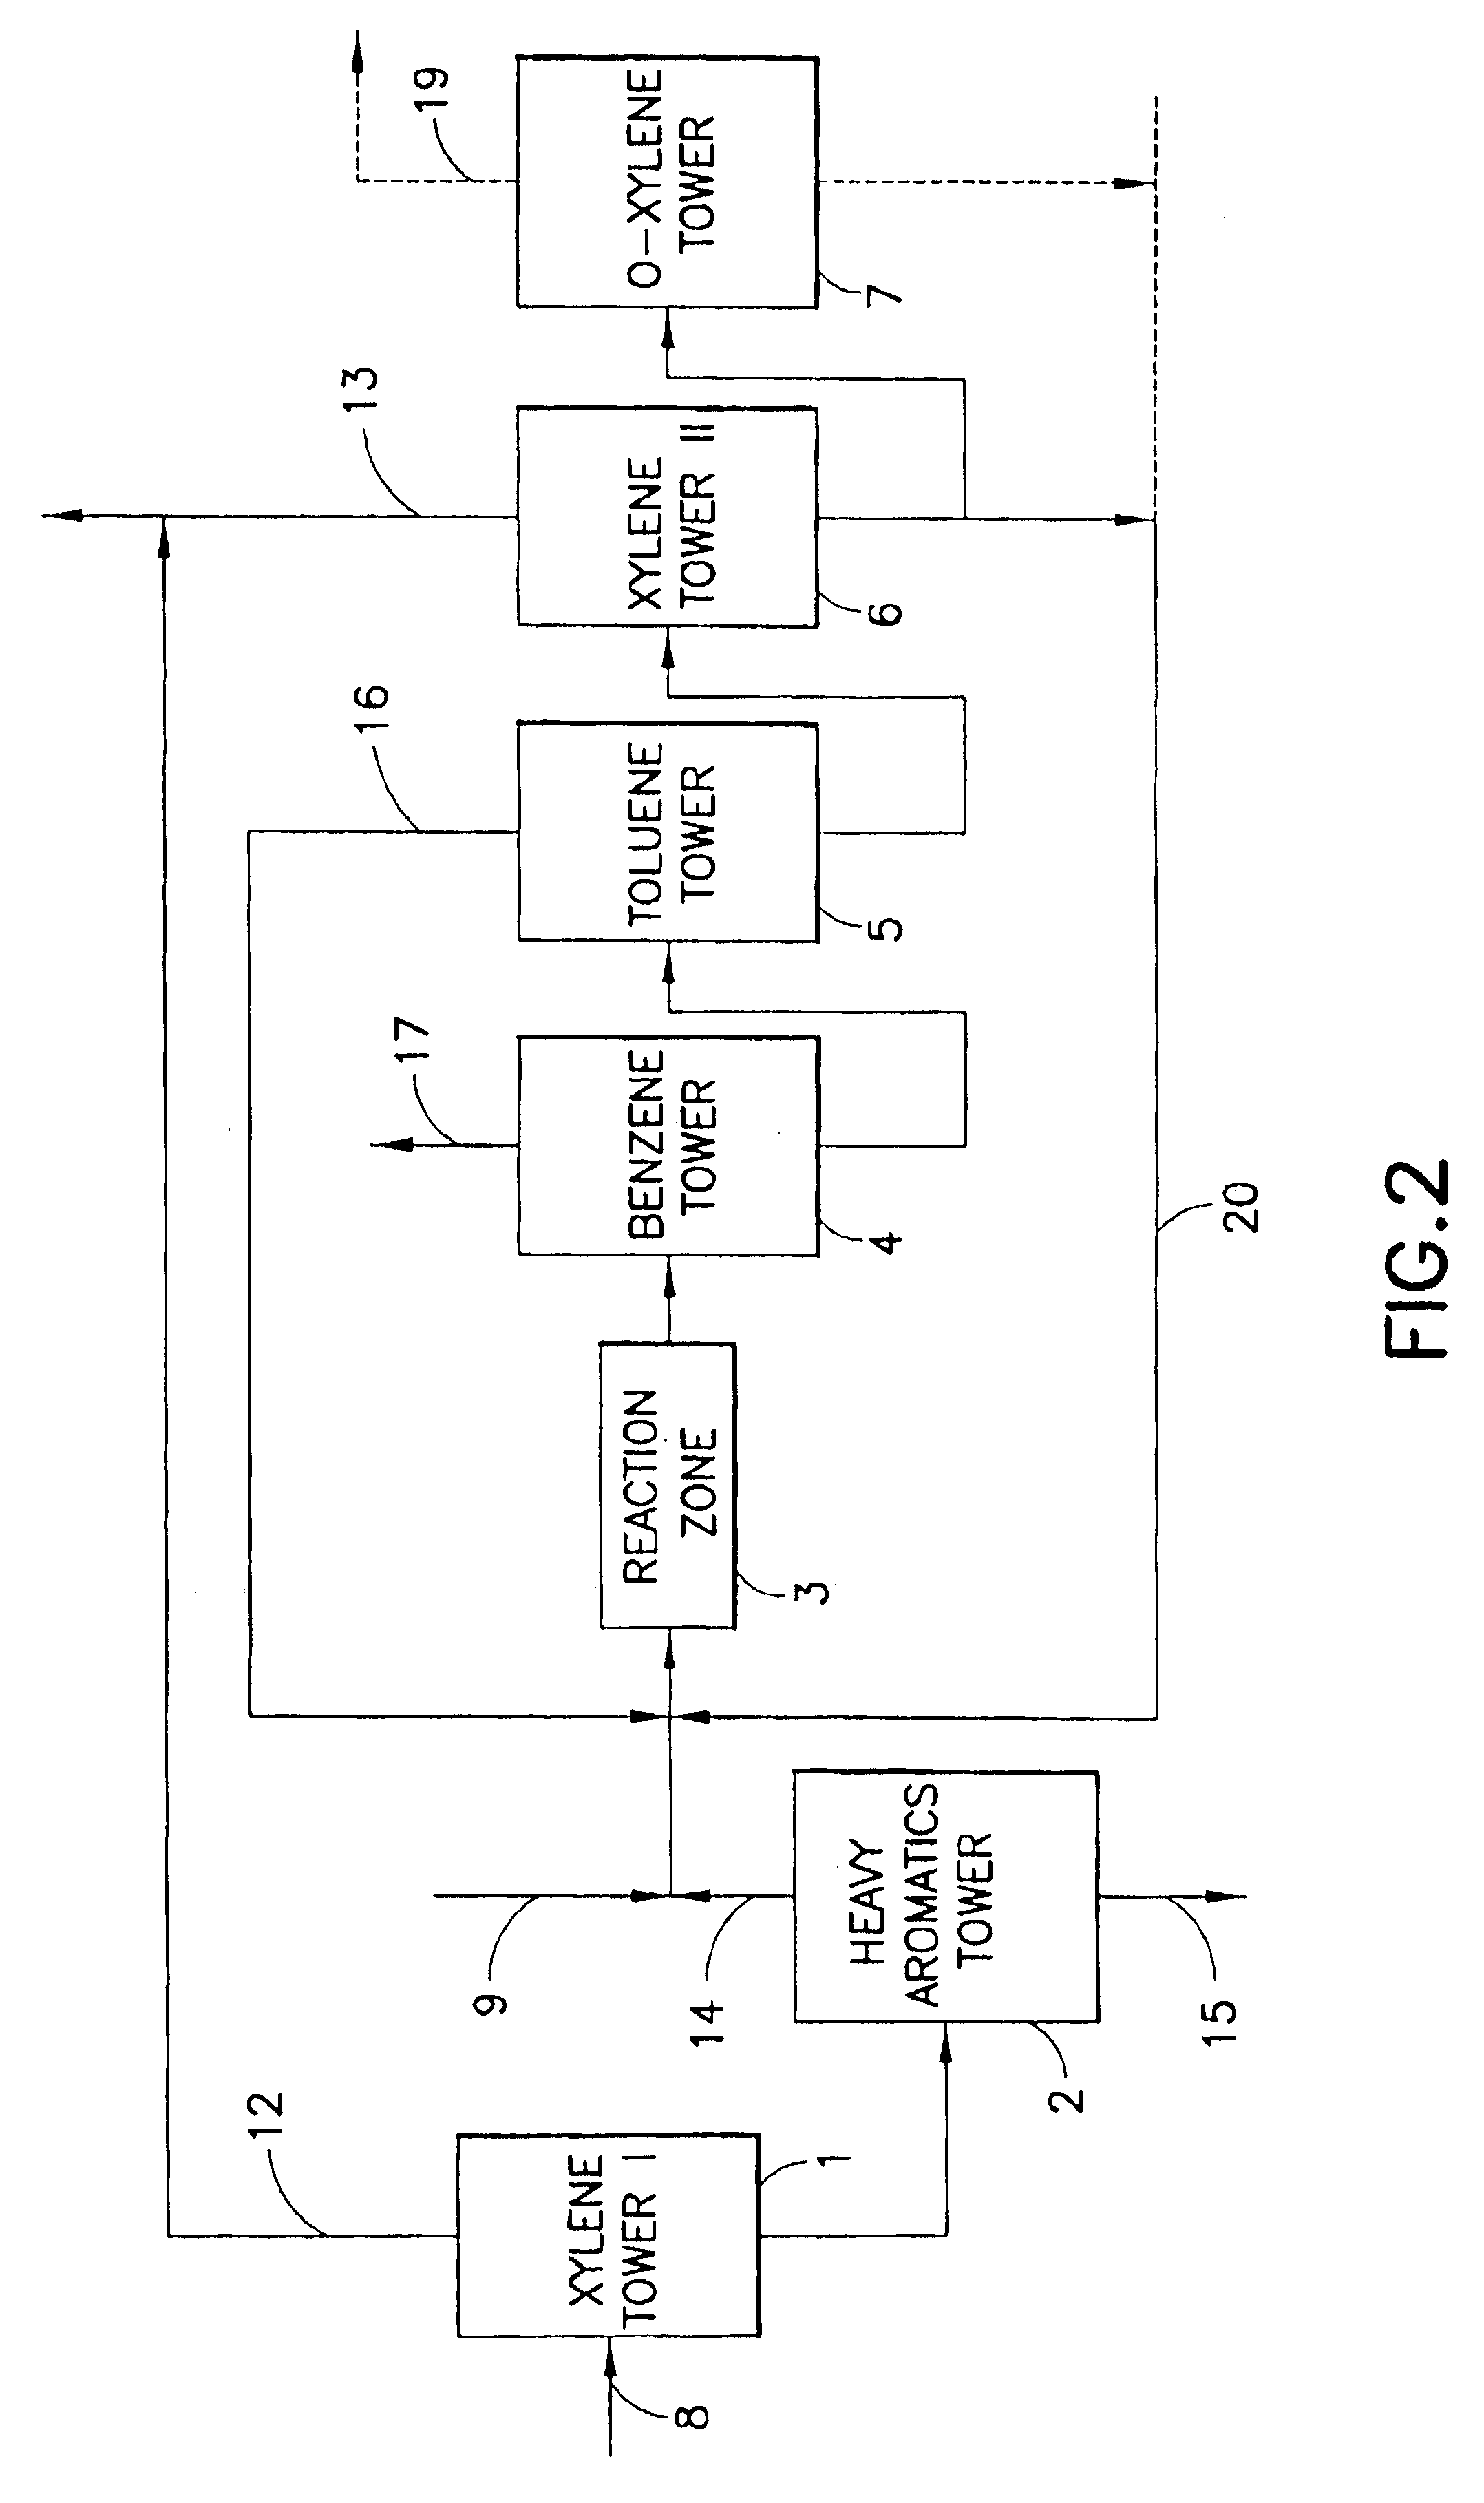 Process for producing p-xylene